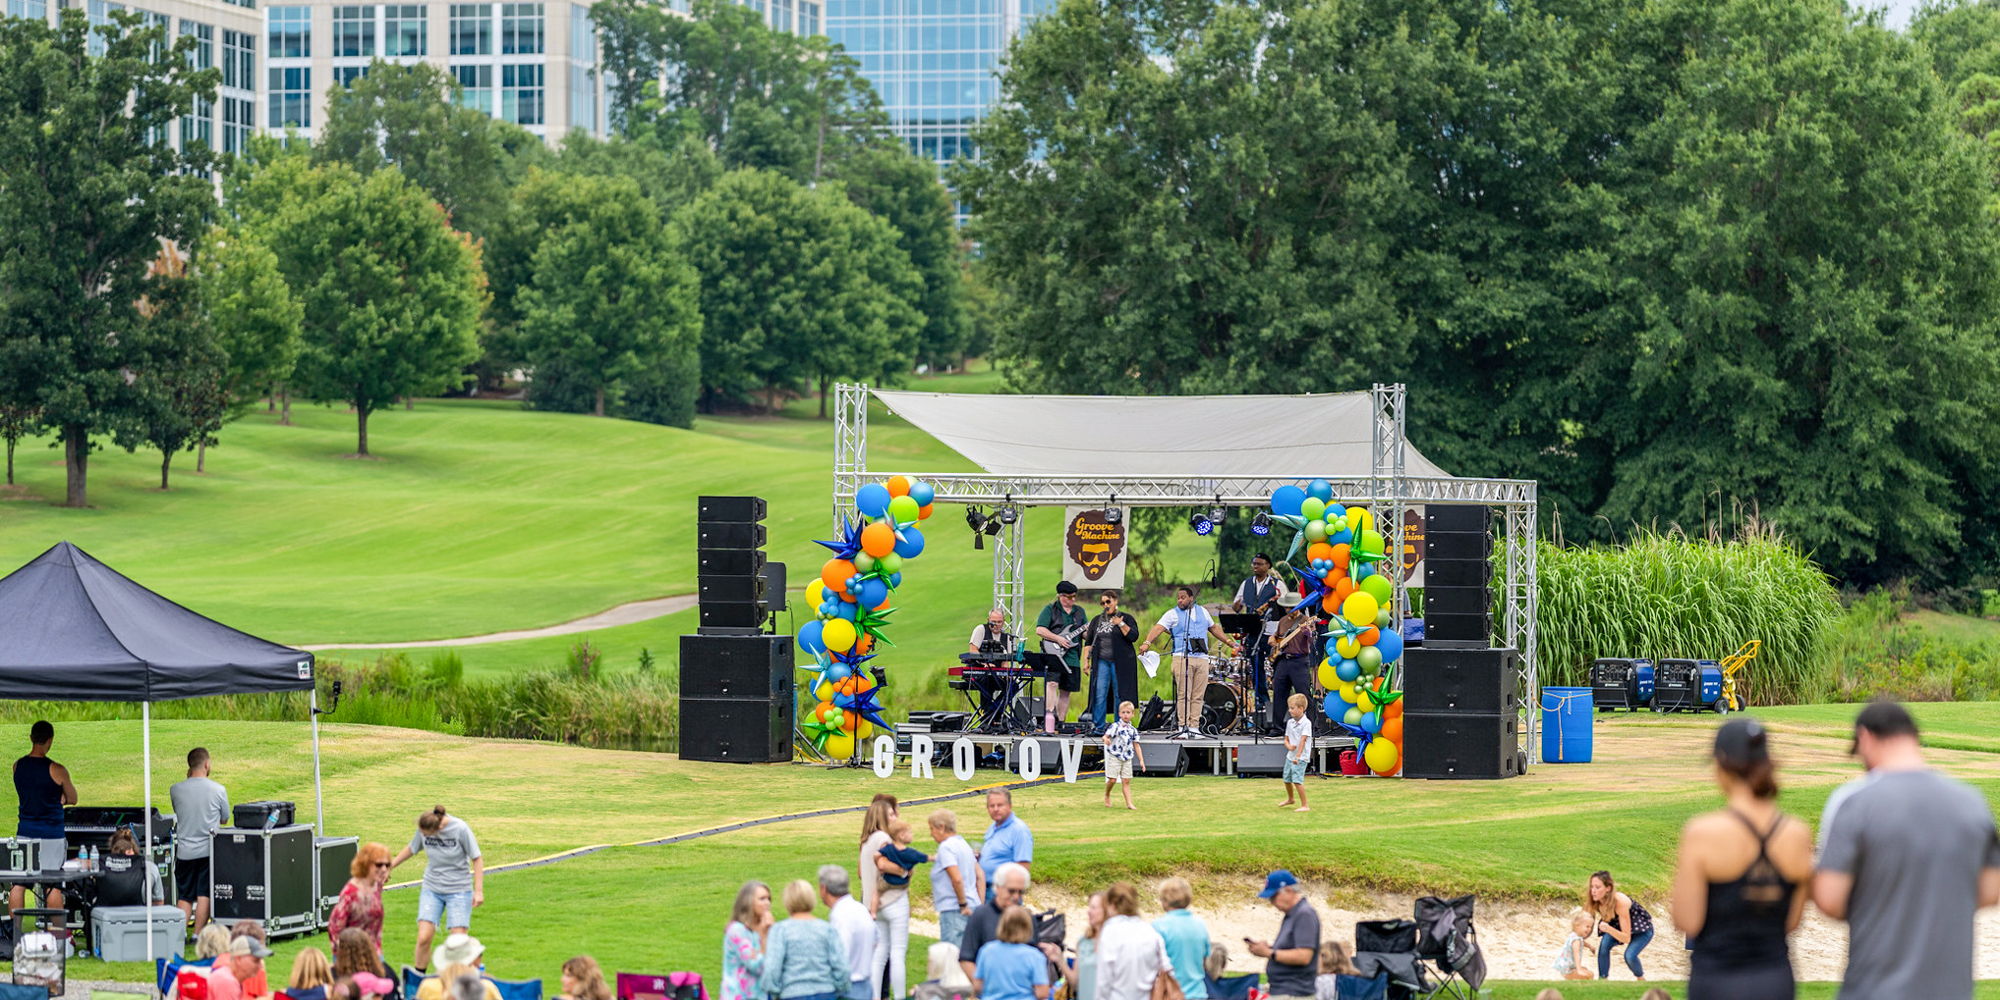 Live at 11 - Outdoor Concert in Ballantyne promotional image